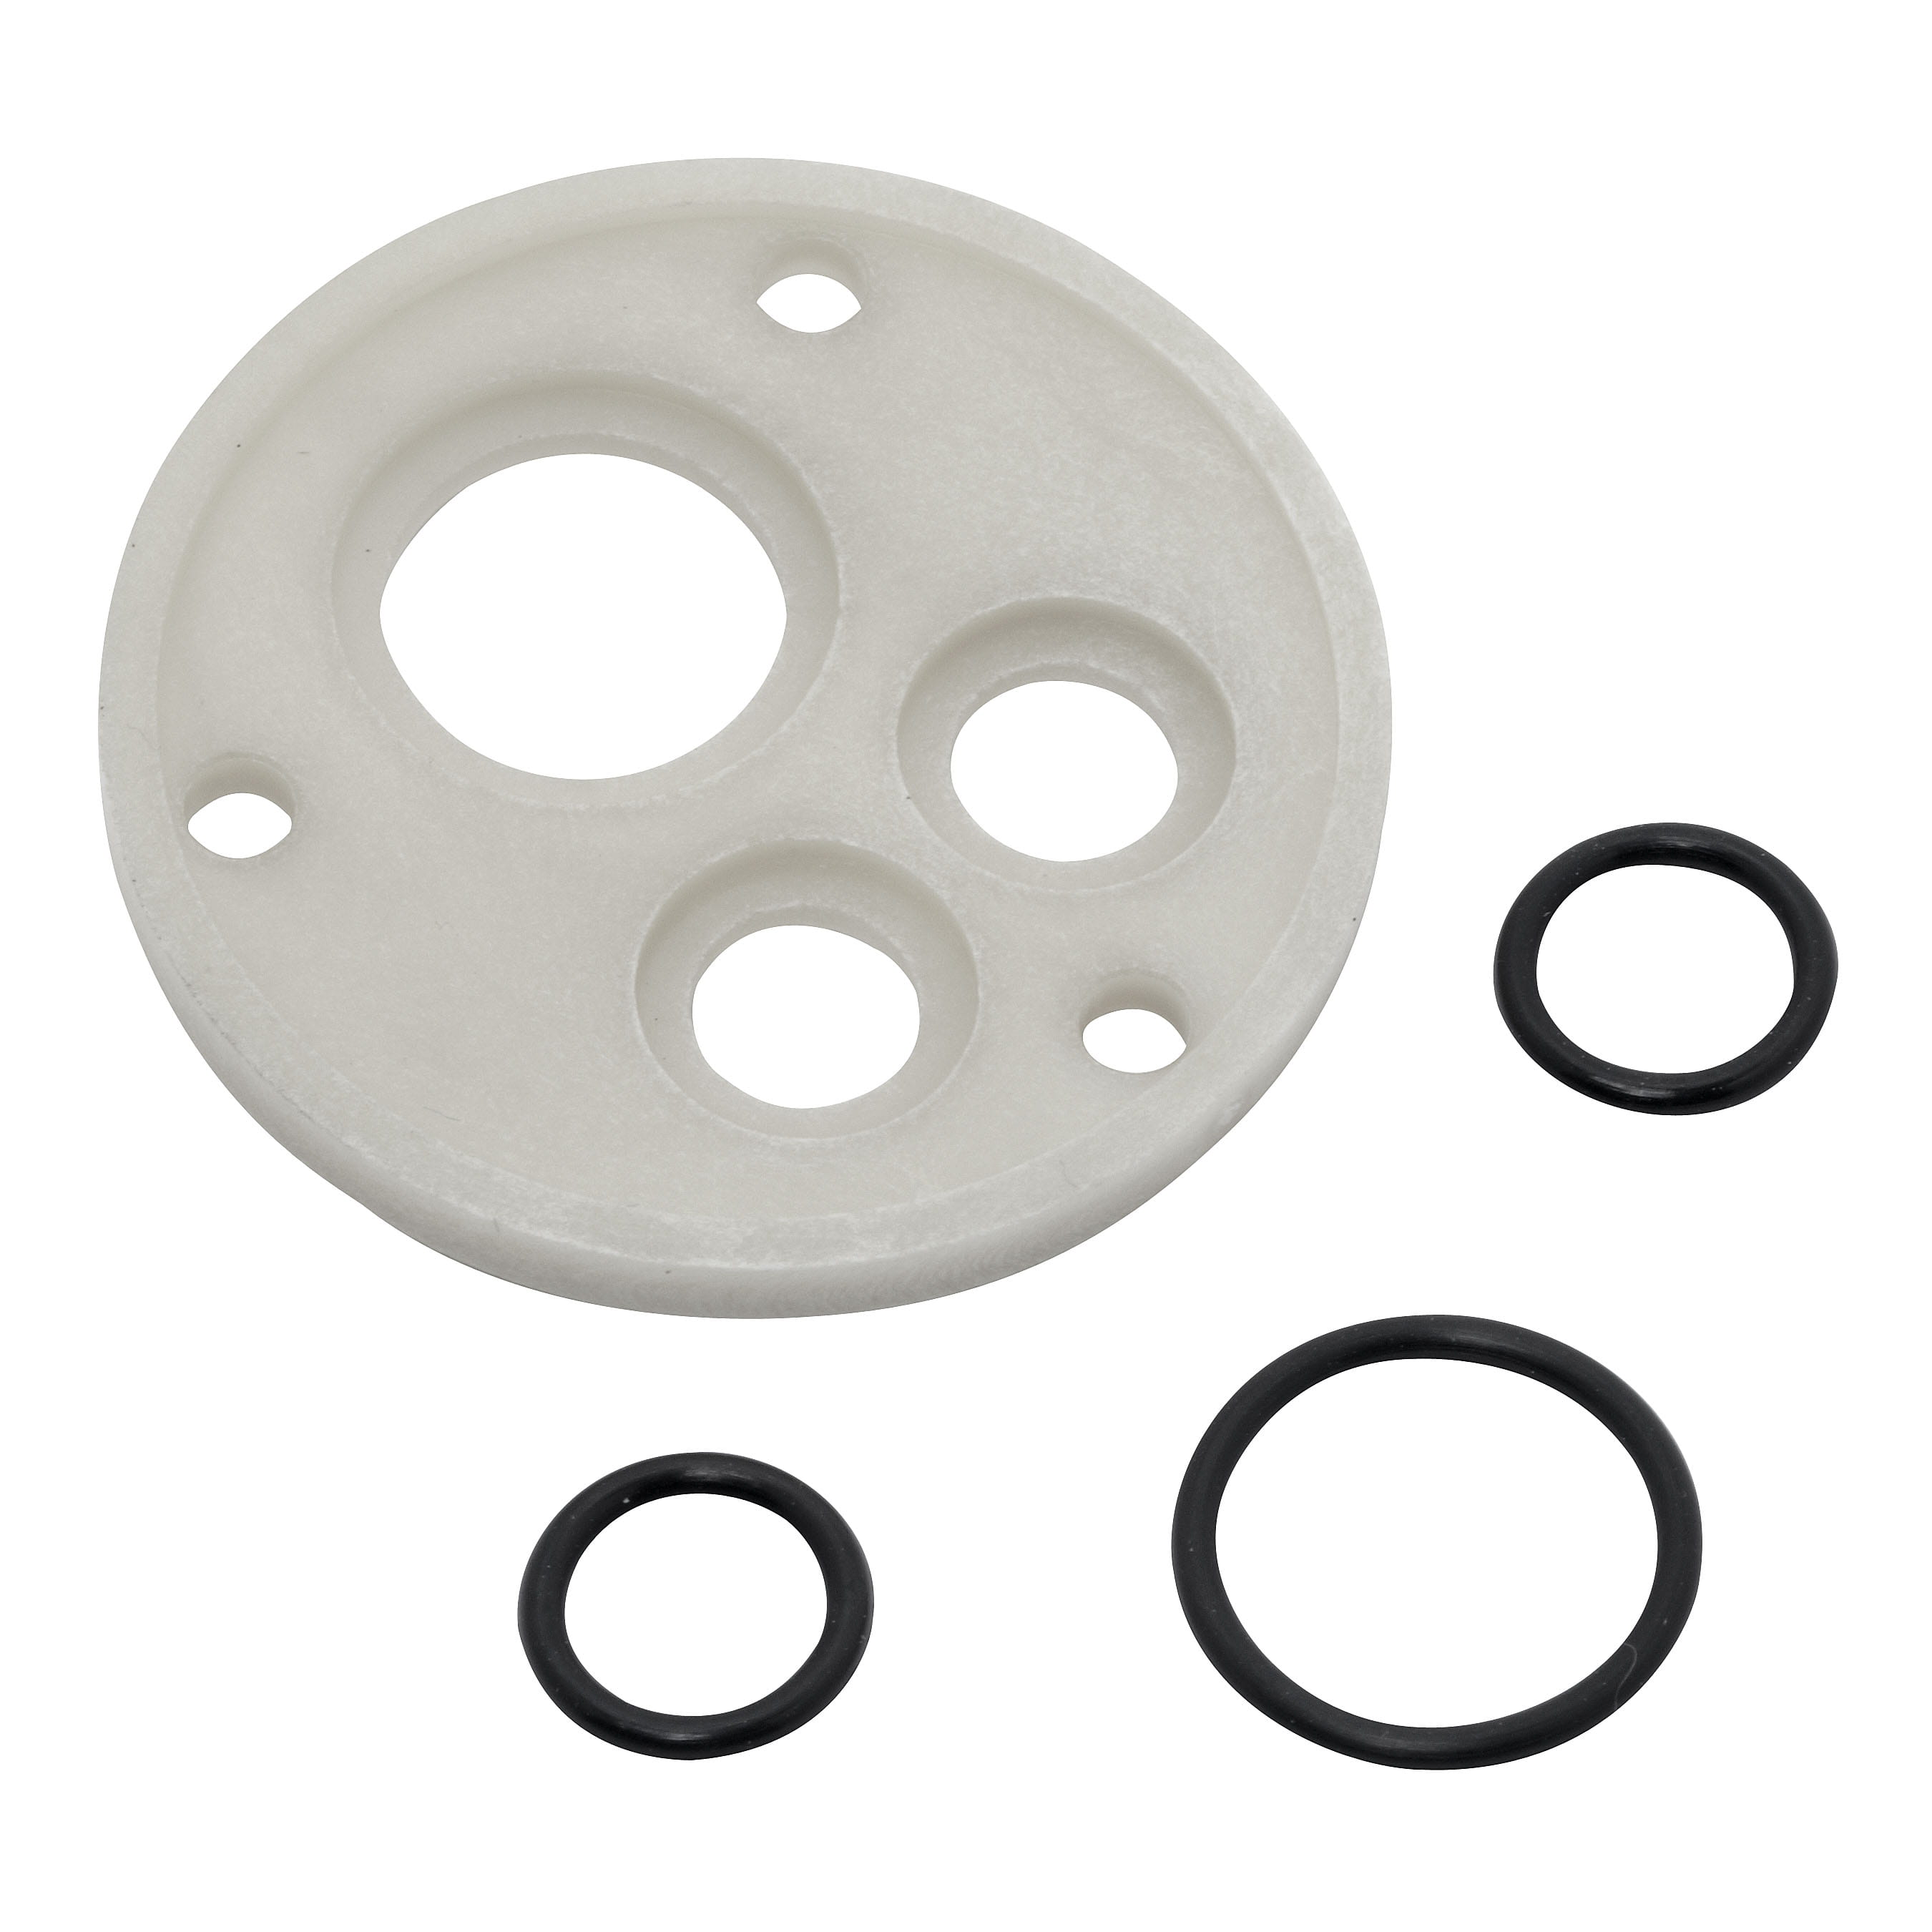 Faucet O-Ring Disk and Spacer Kit (Blister Pack 100)